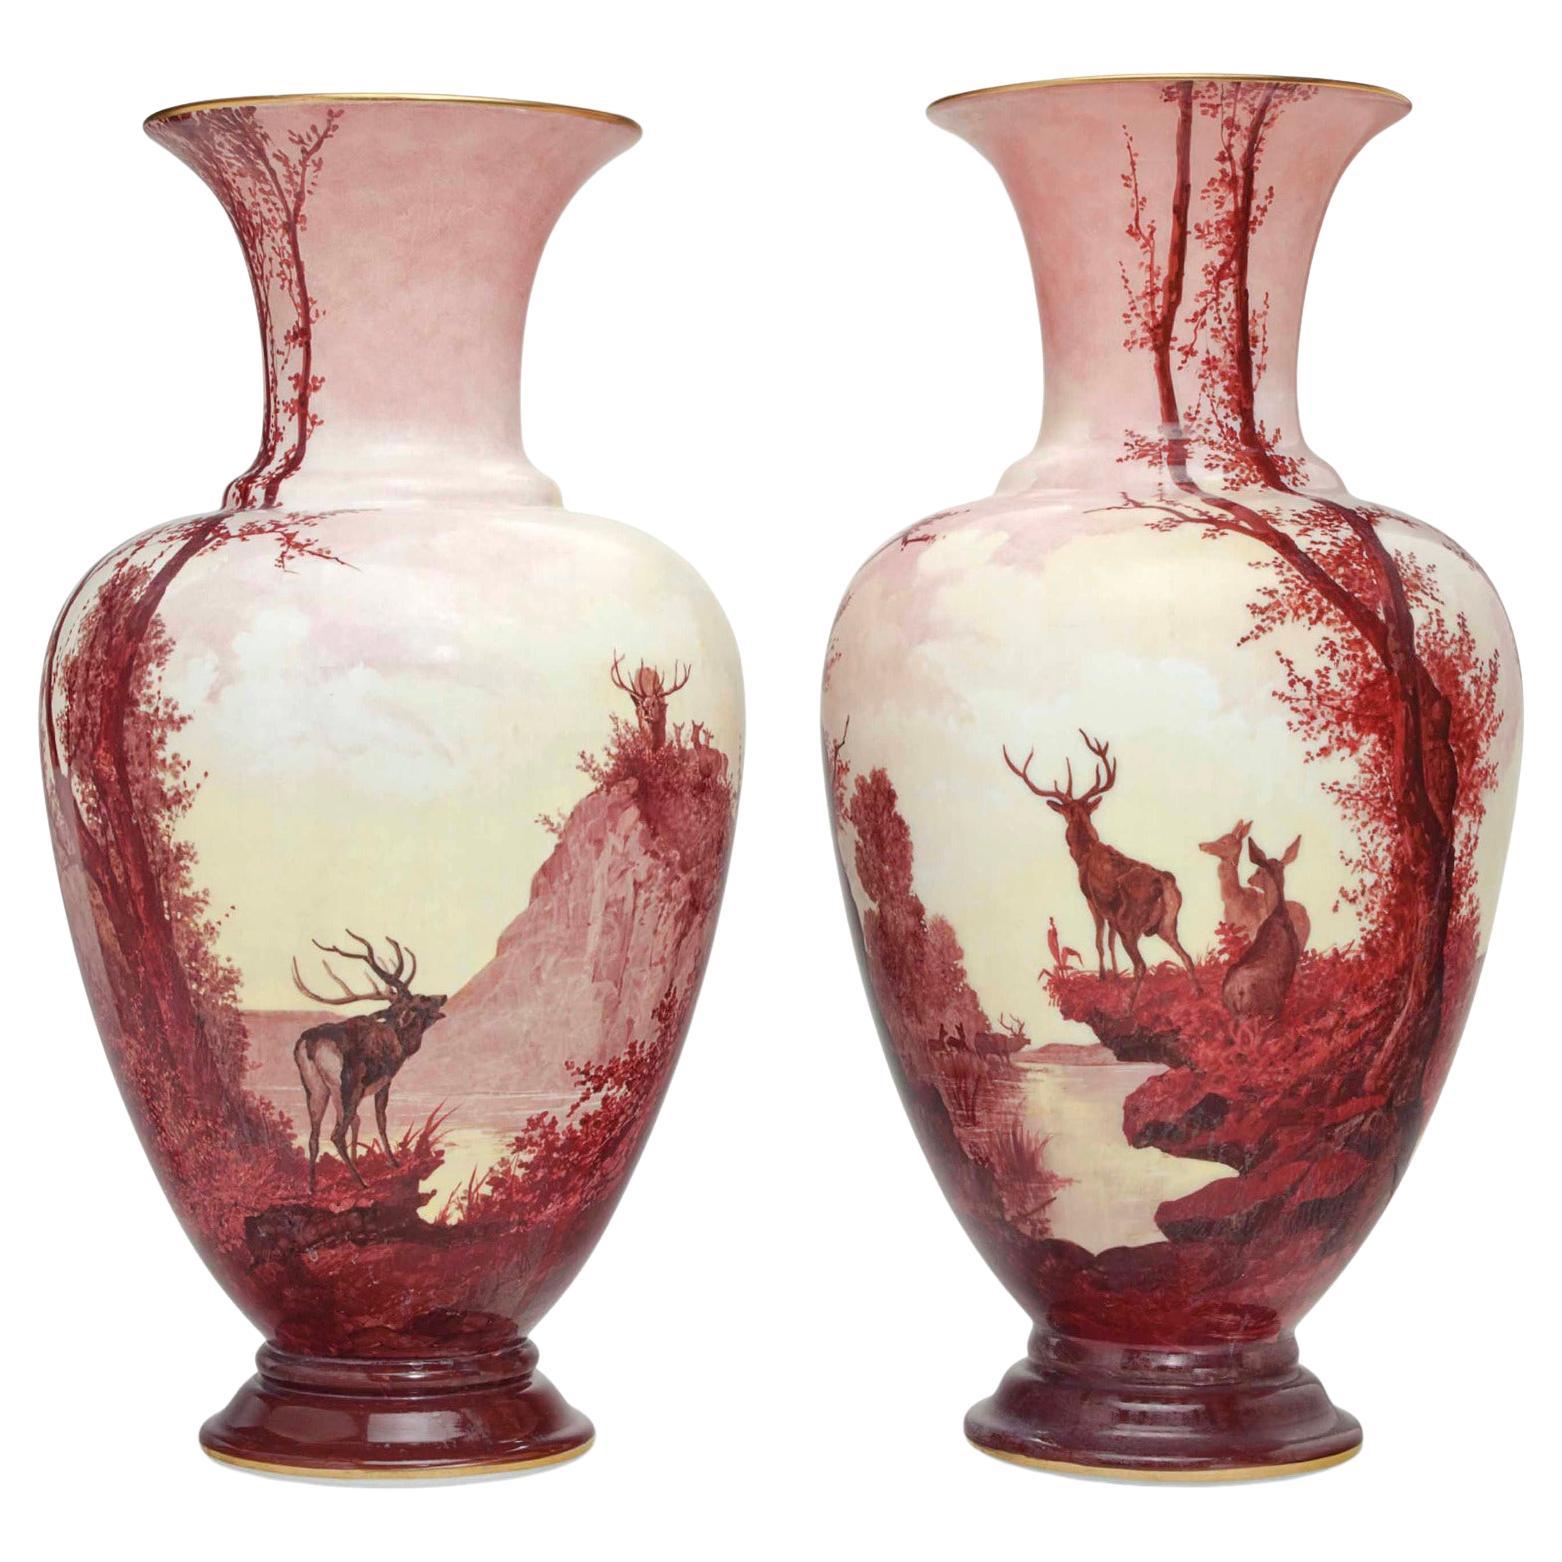 Large Pair of French Baccarat Opaline Glass Vases, Circa 1884